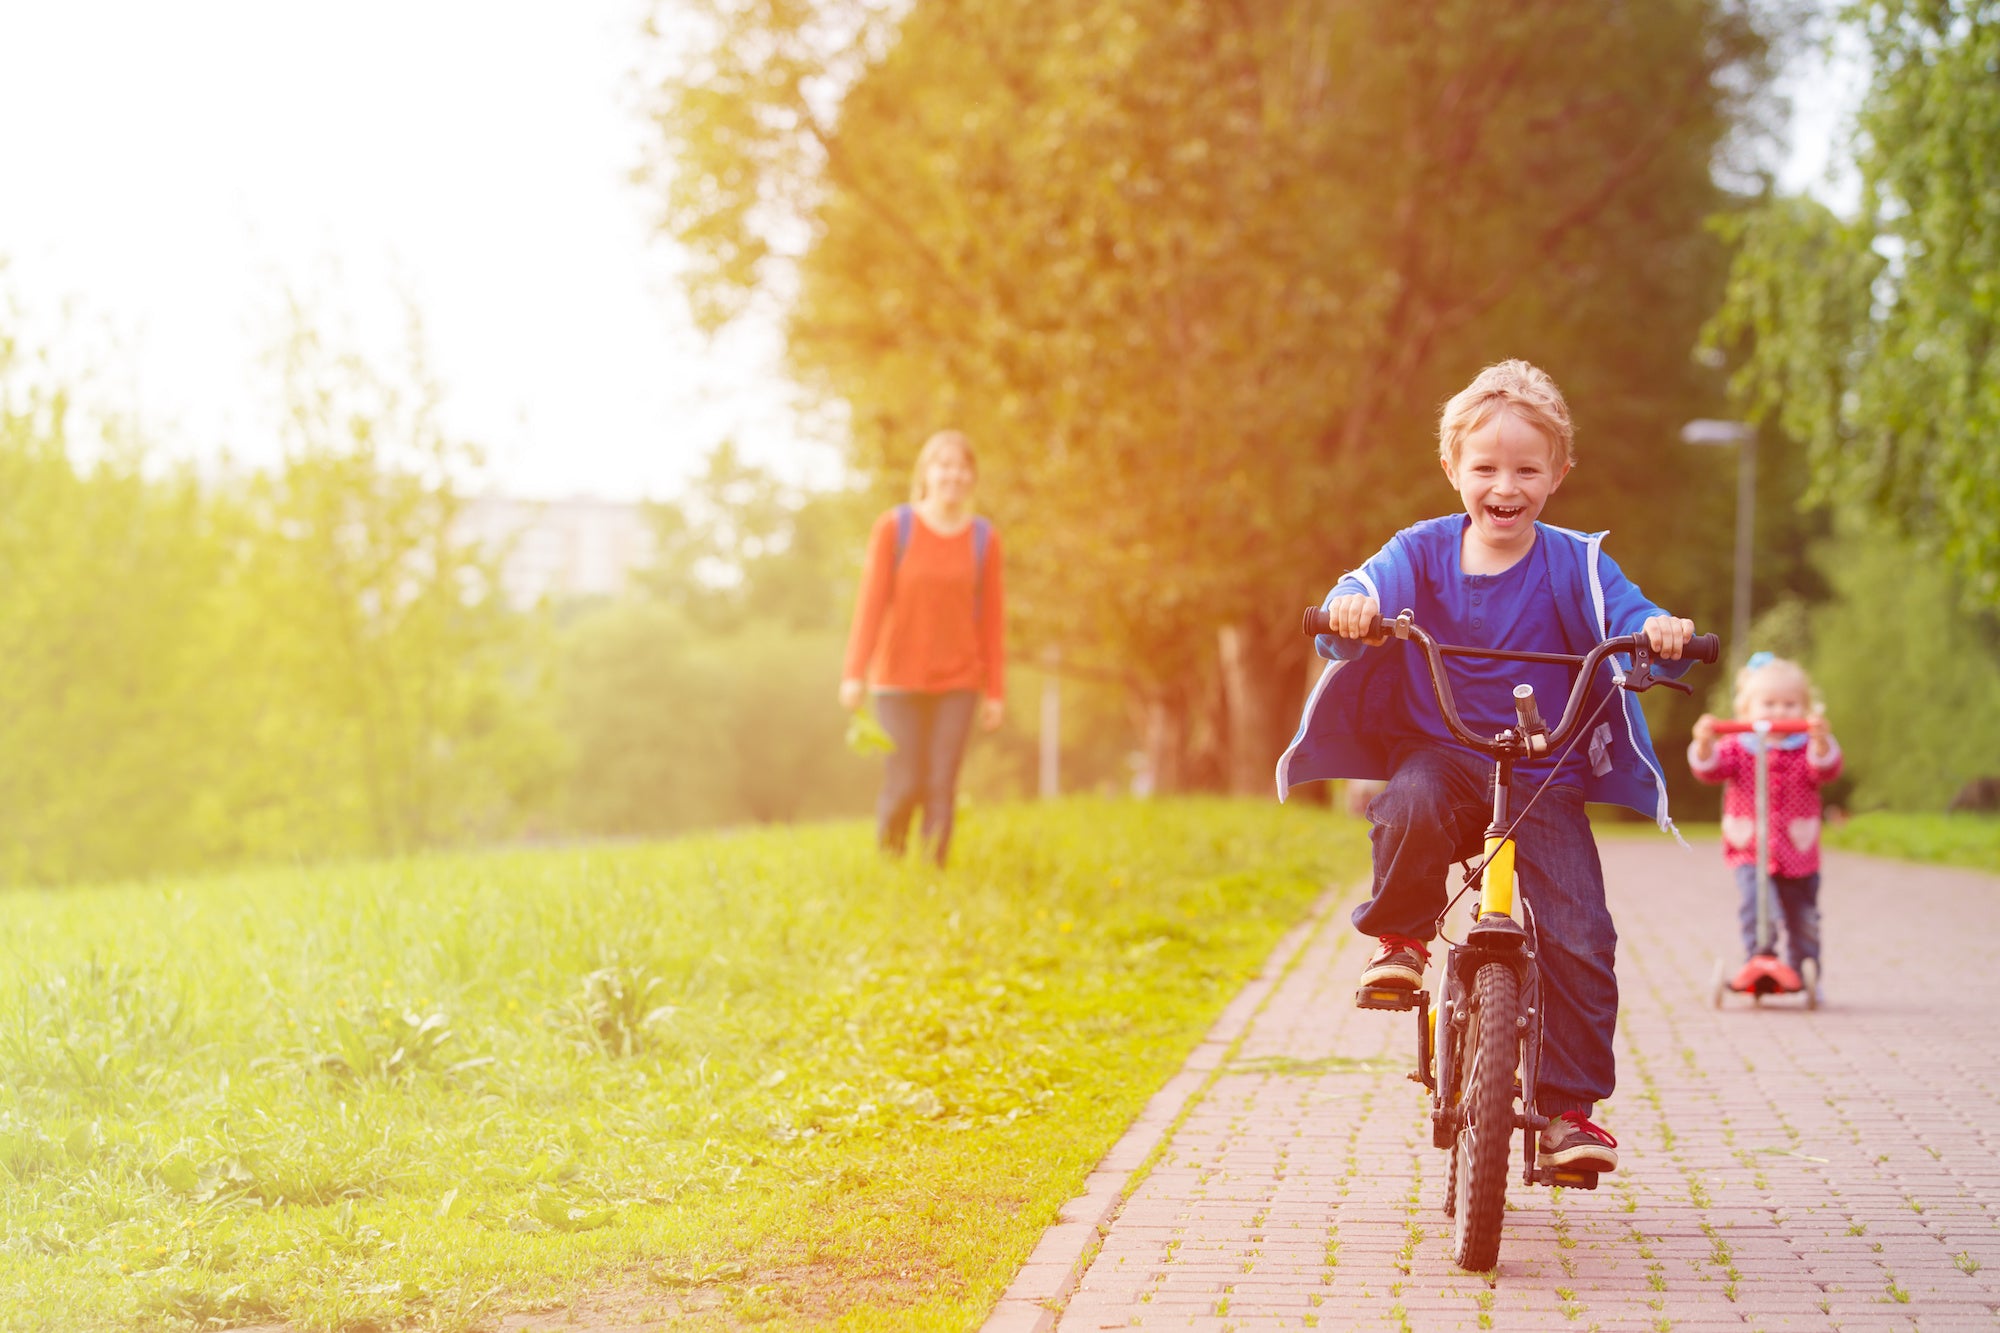 how to teach a kid to ride without training wheels